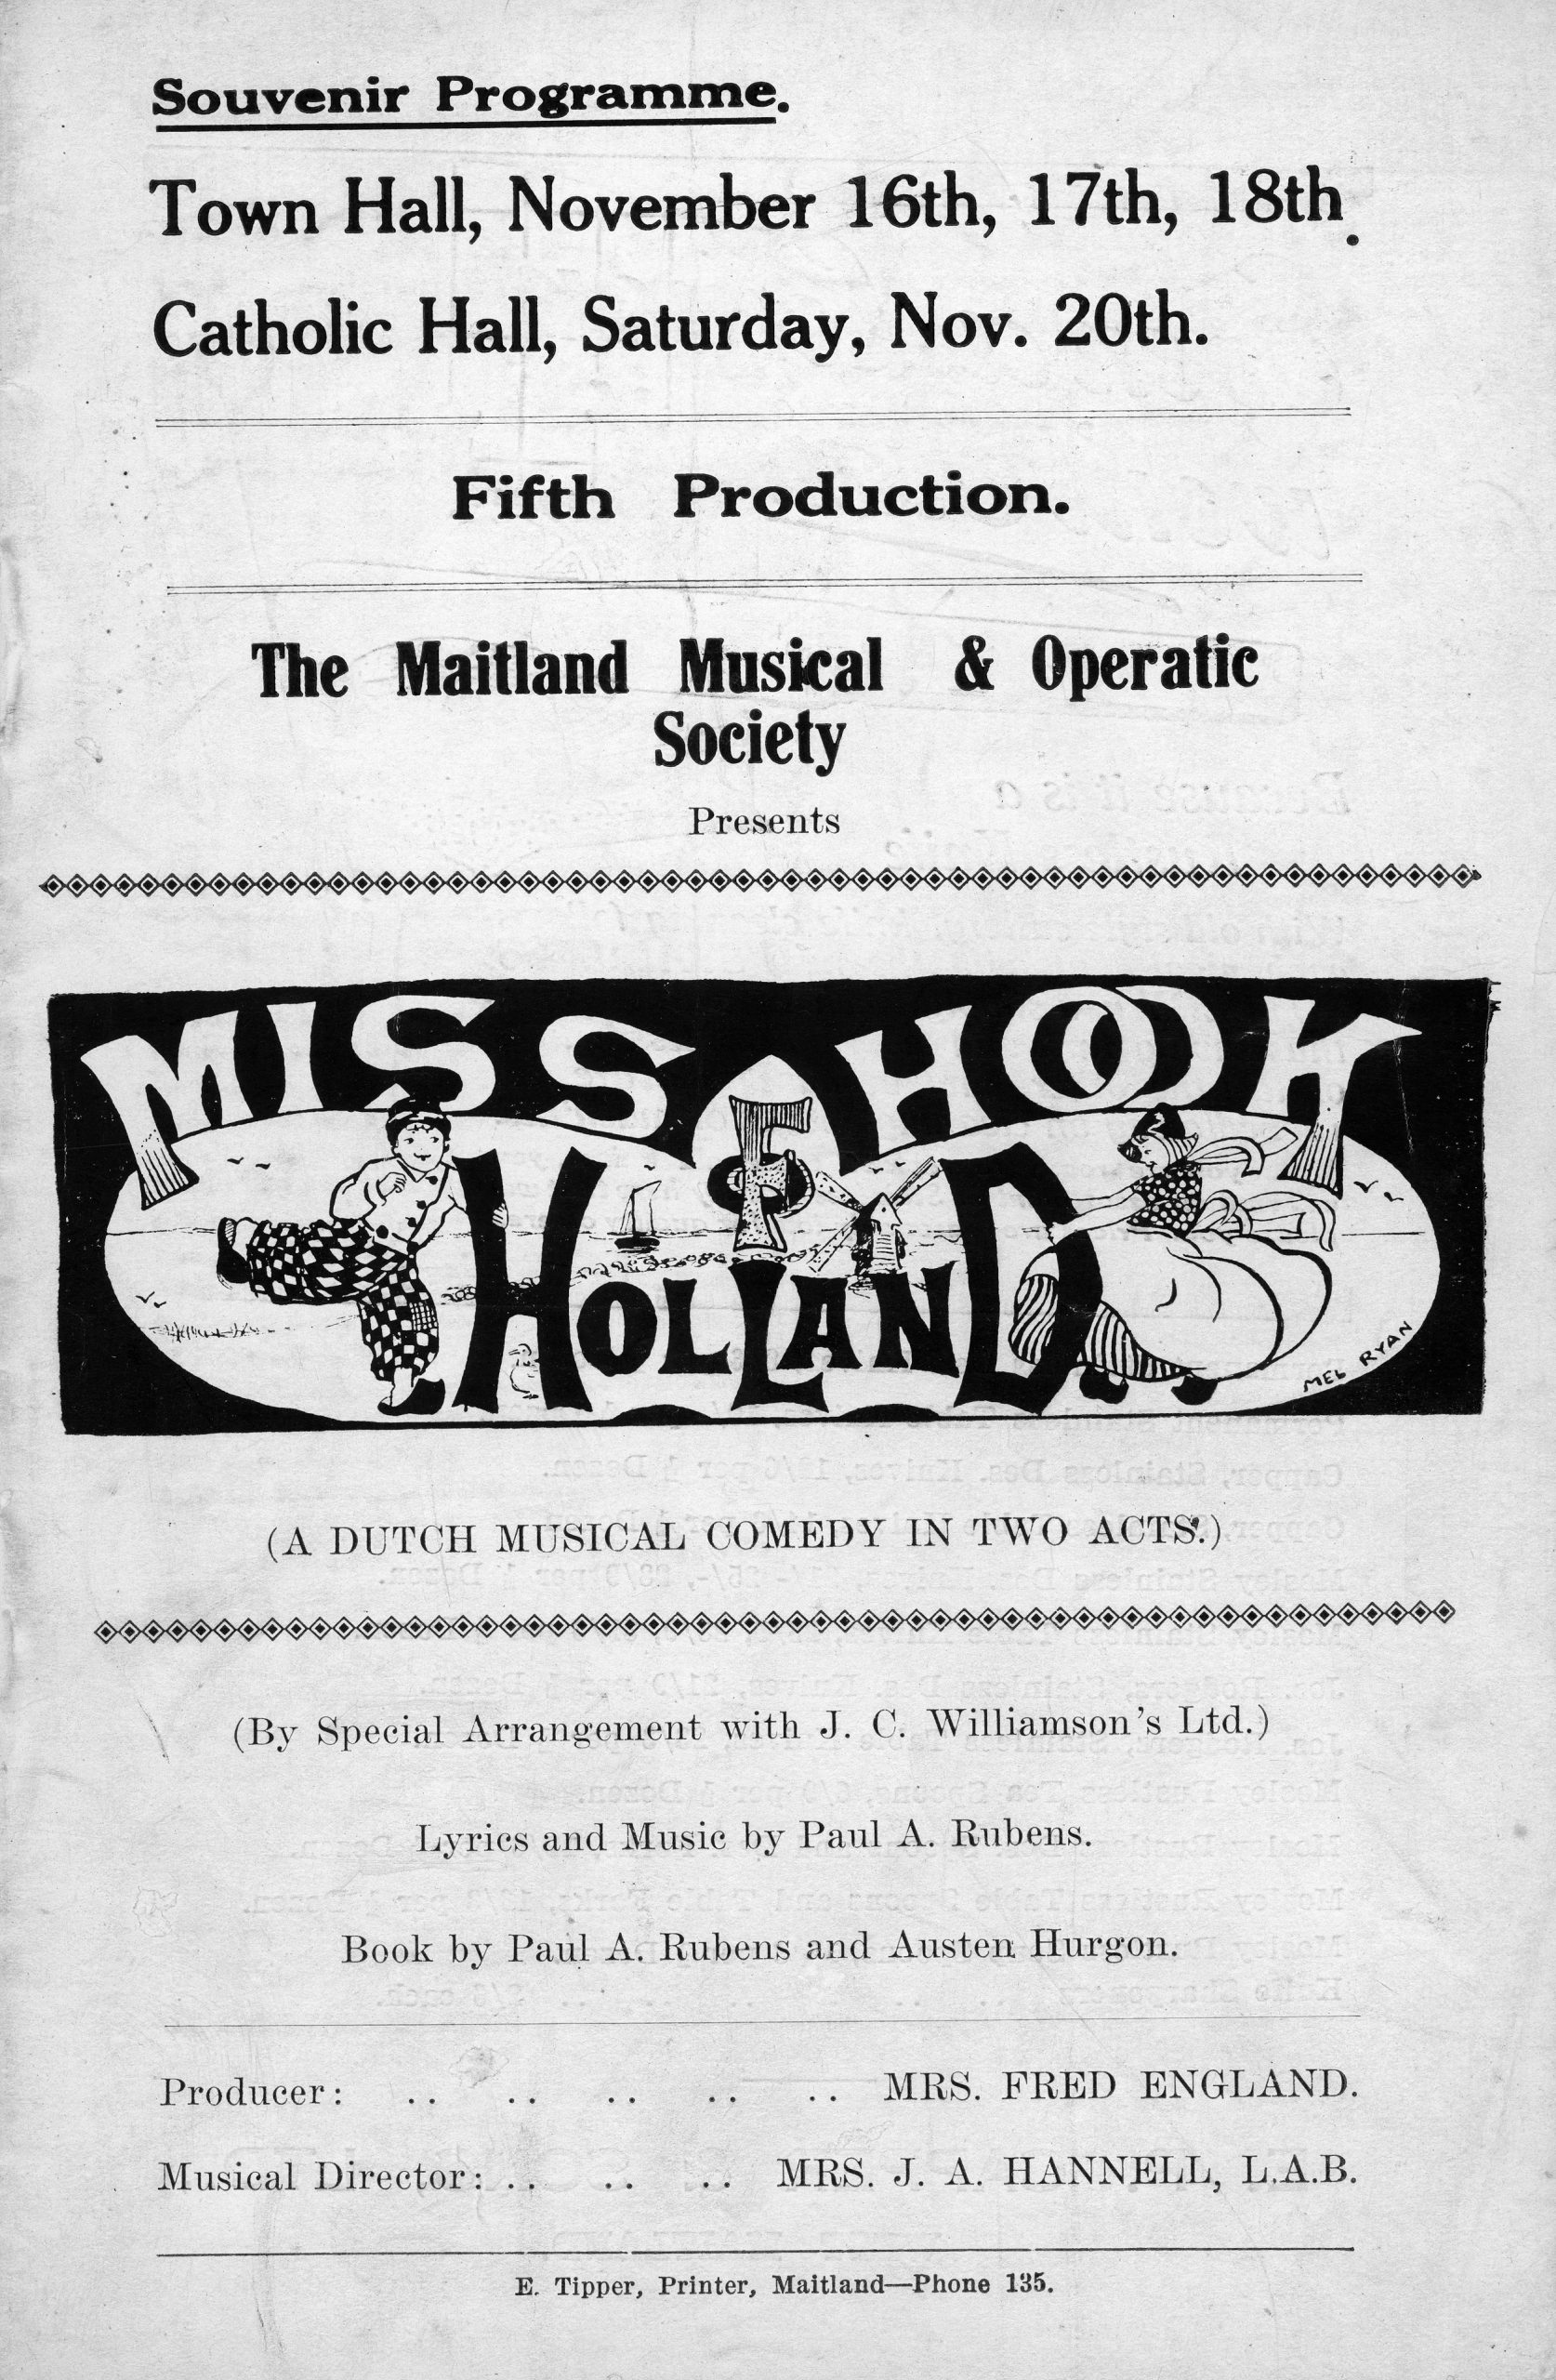 Title page of the souvenir musical programme for "Miss Hook of Holland (A DUTCH MUSICAL COMEDY IN TWO ACTS)" presented by The Maitland Musical & Operatic Society. A graphic features an illustration of a Dutch boy and girl gripping the title on whiel standing in a meadow - a windmill in the distance.